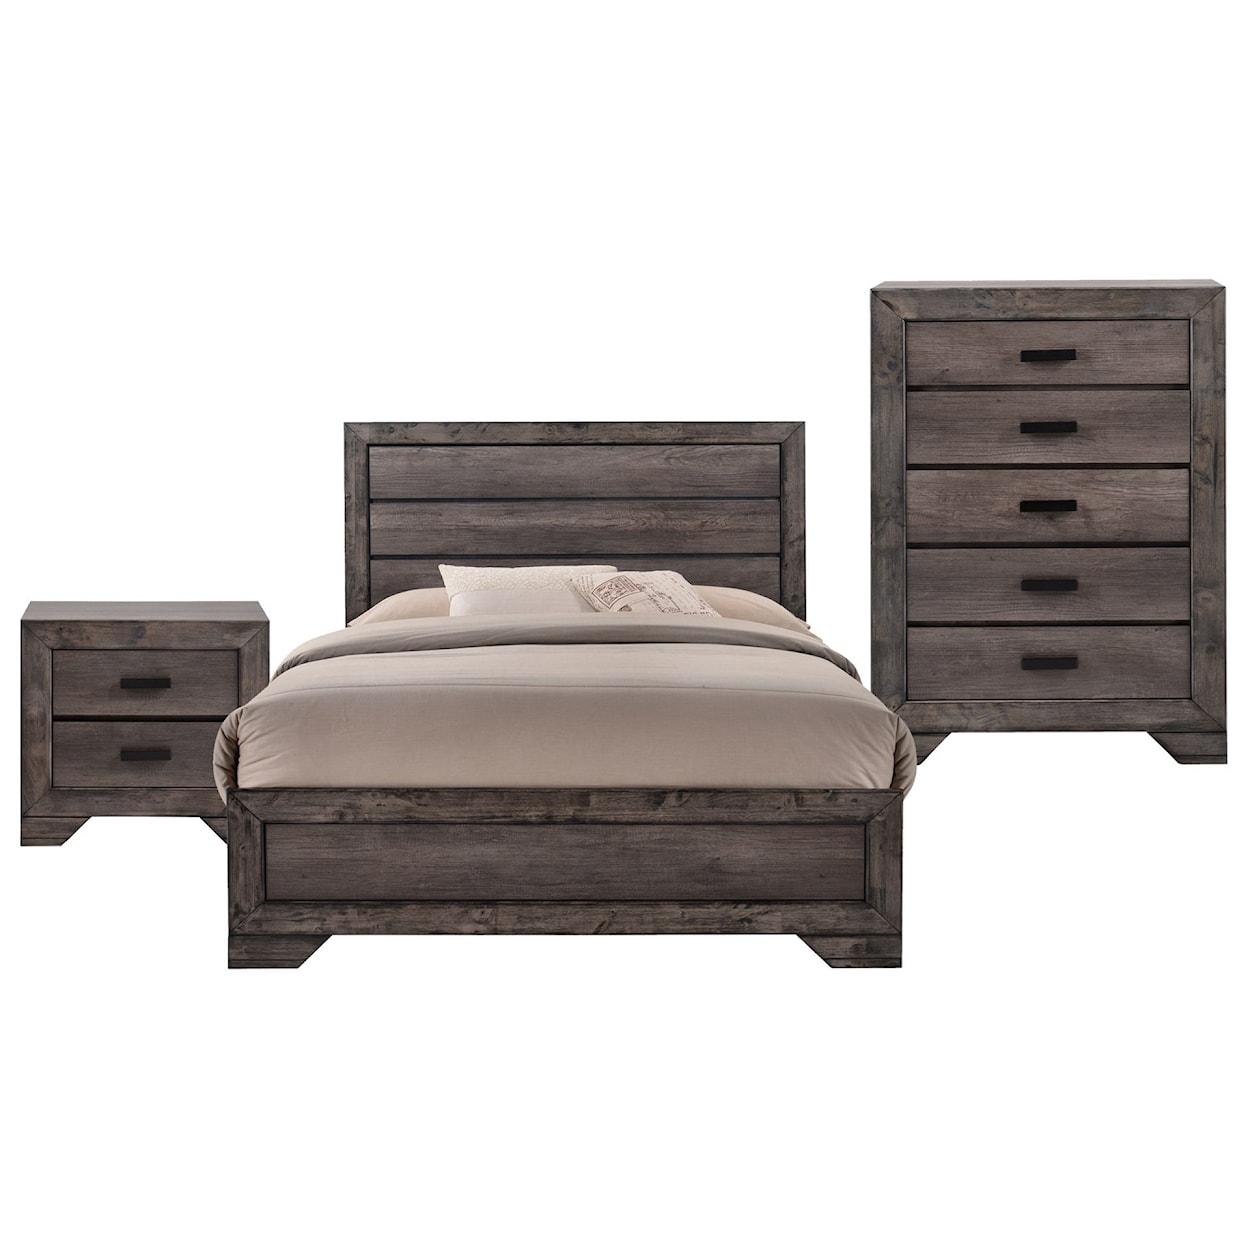 Elements International Nathan 3-Piece King Bedroom Group